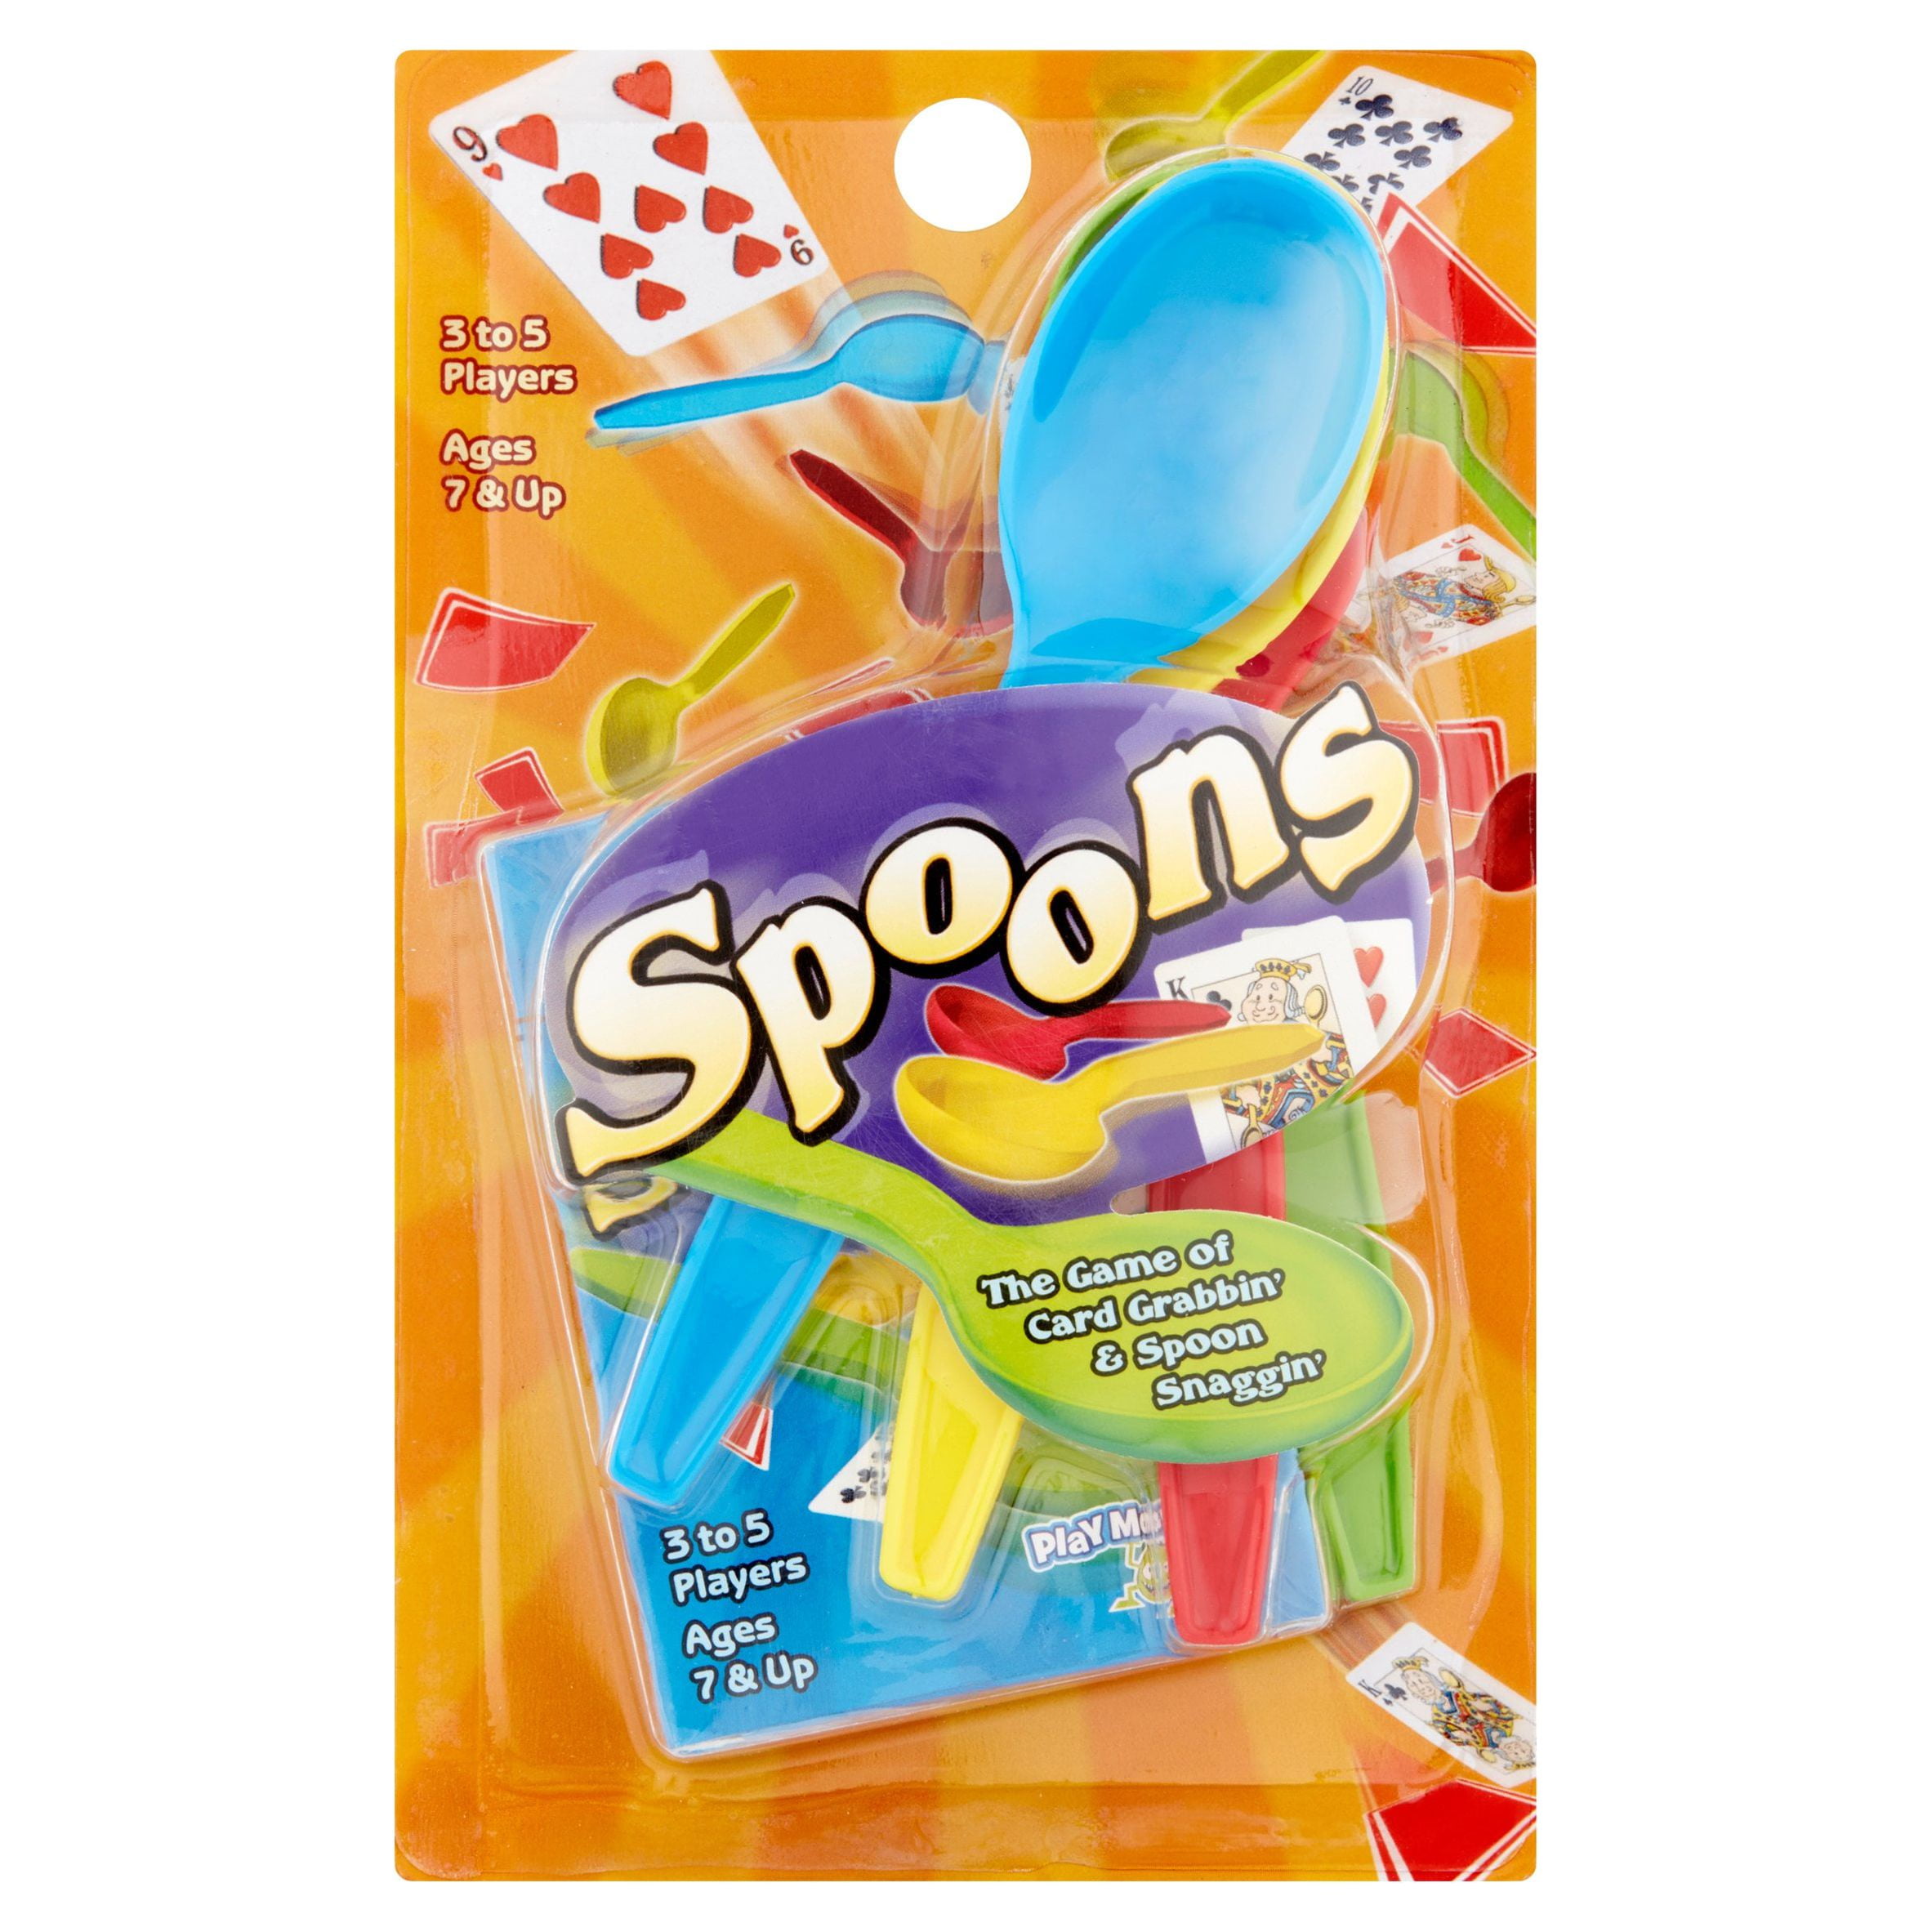 Spoons! The classic card game with a reading twist! – Languageley